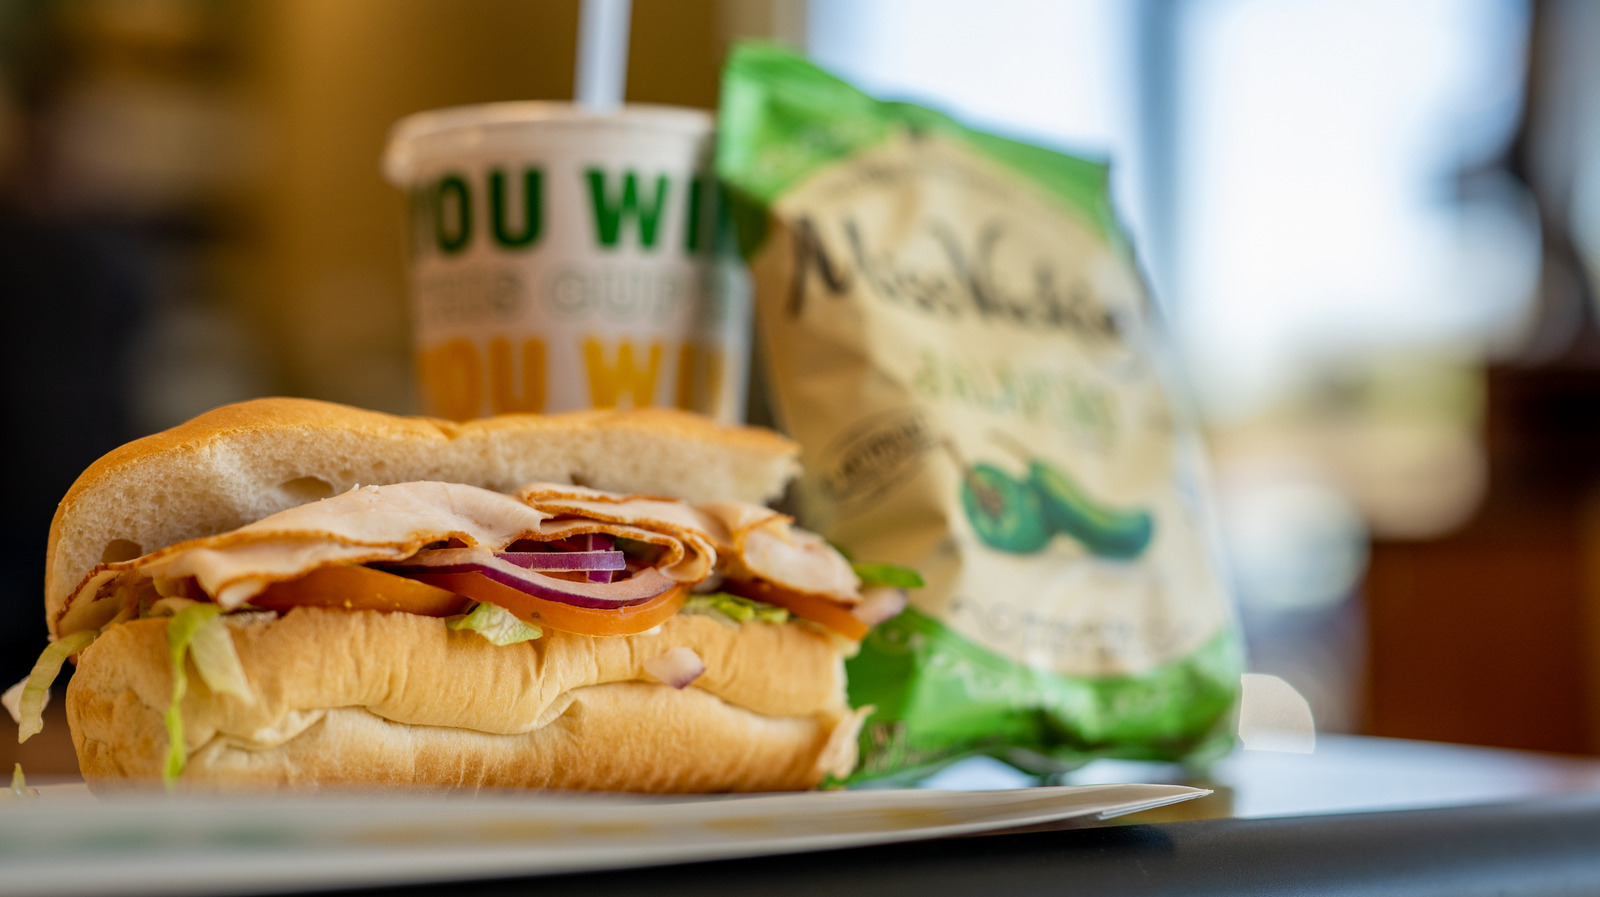 Do Subway sandwich coupons really work? Here's why not 